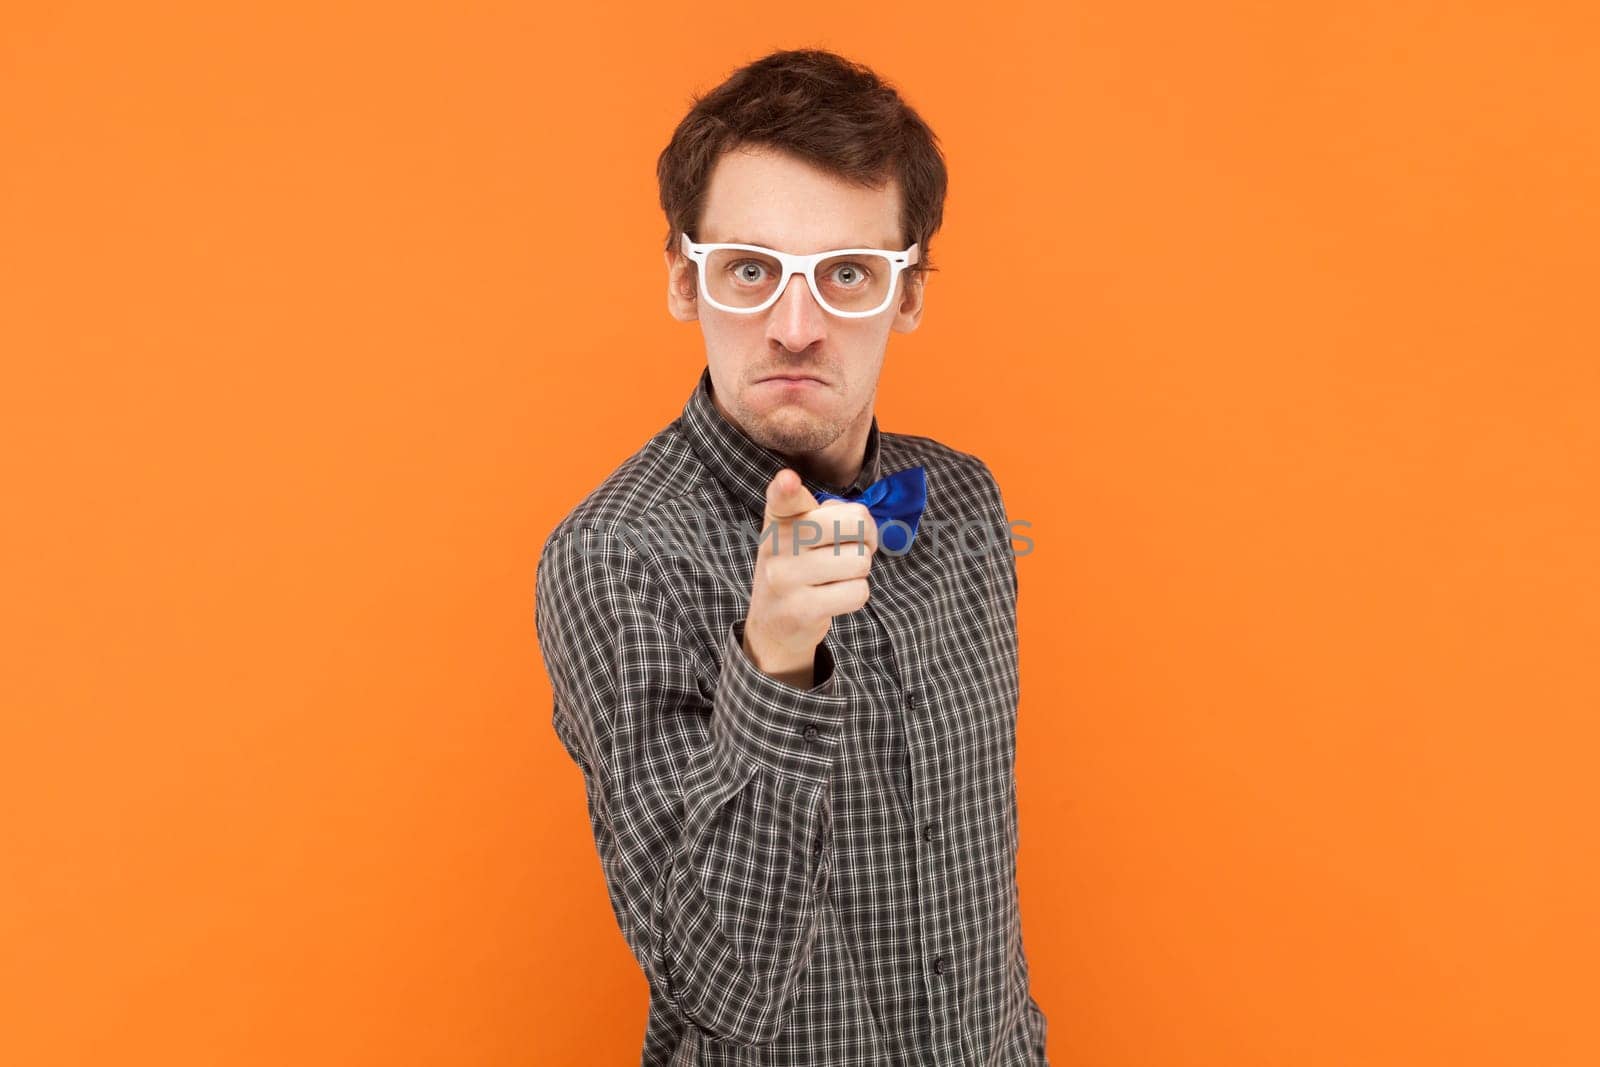 Self assured serious man nerd points index finger at camera chooses you looks directly at camera, wearing shirt with blue bow tie and white glasses. Indoor studio shot isolated on orange background.